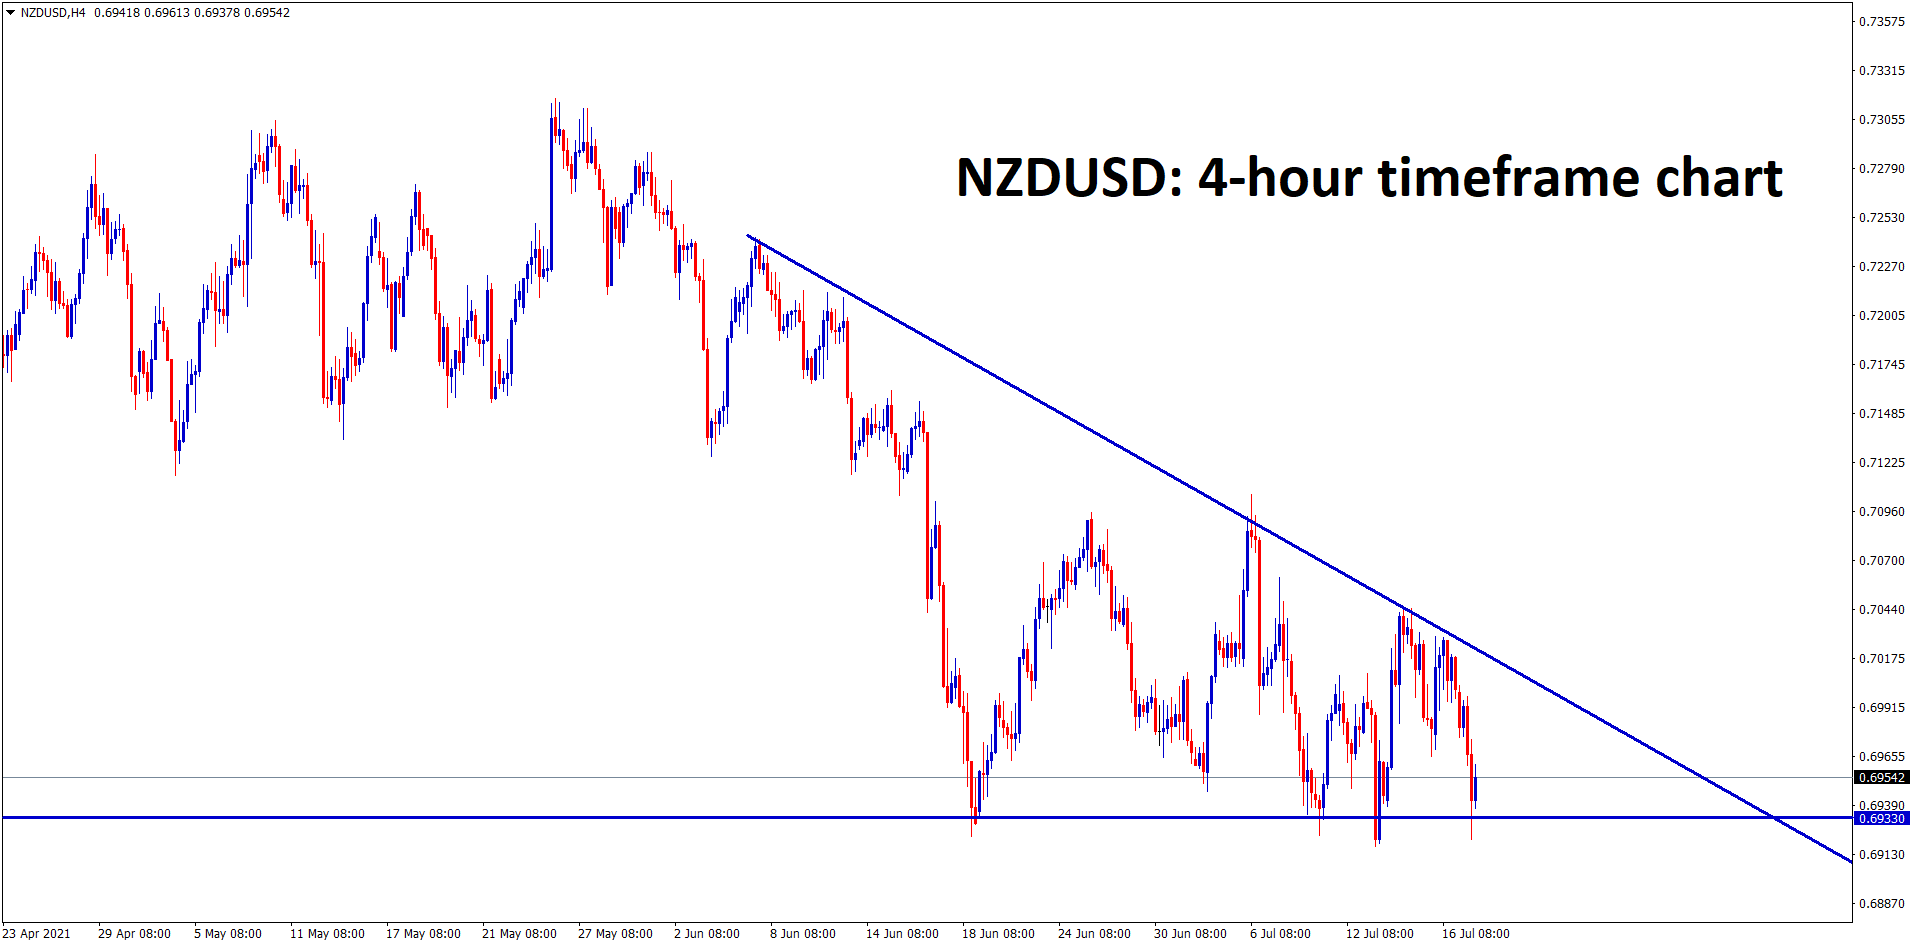 NZDUSD is moving in a Descending Triangle pattern wait for the breakout from this triangle.